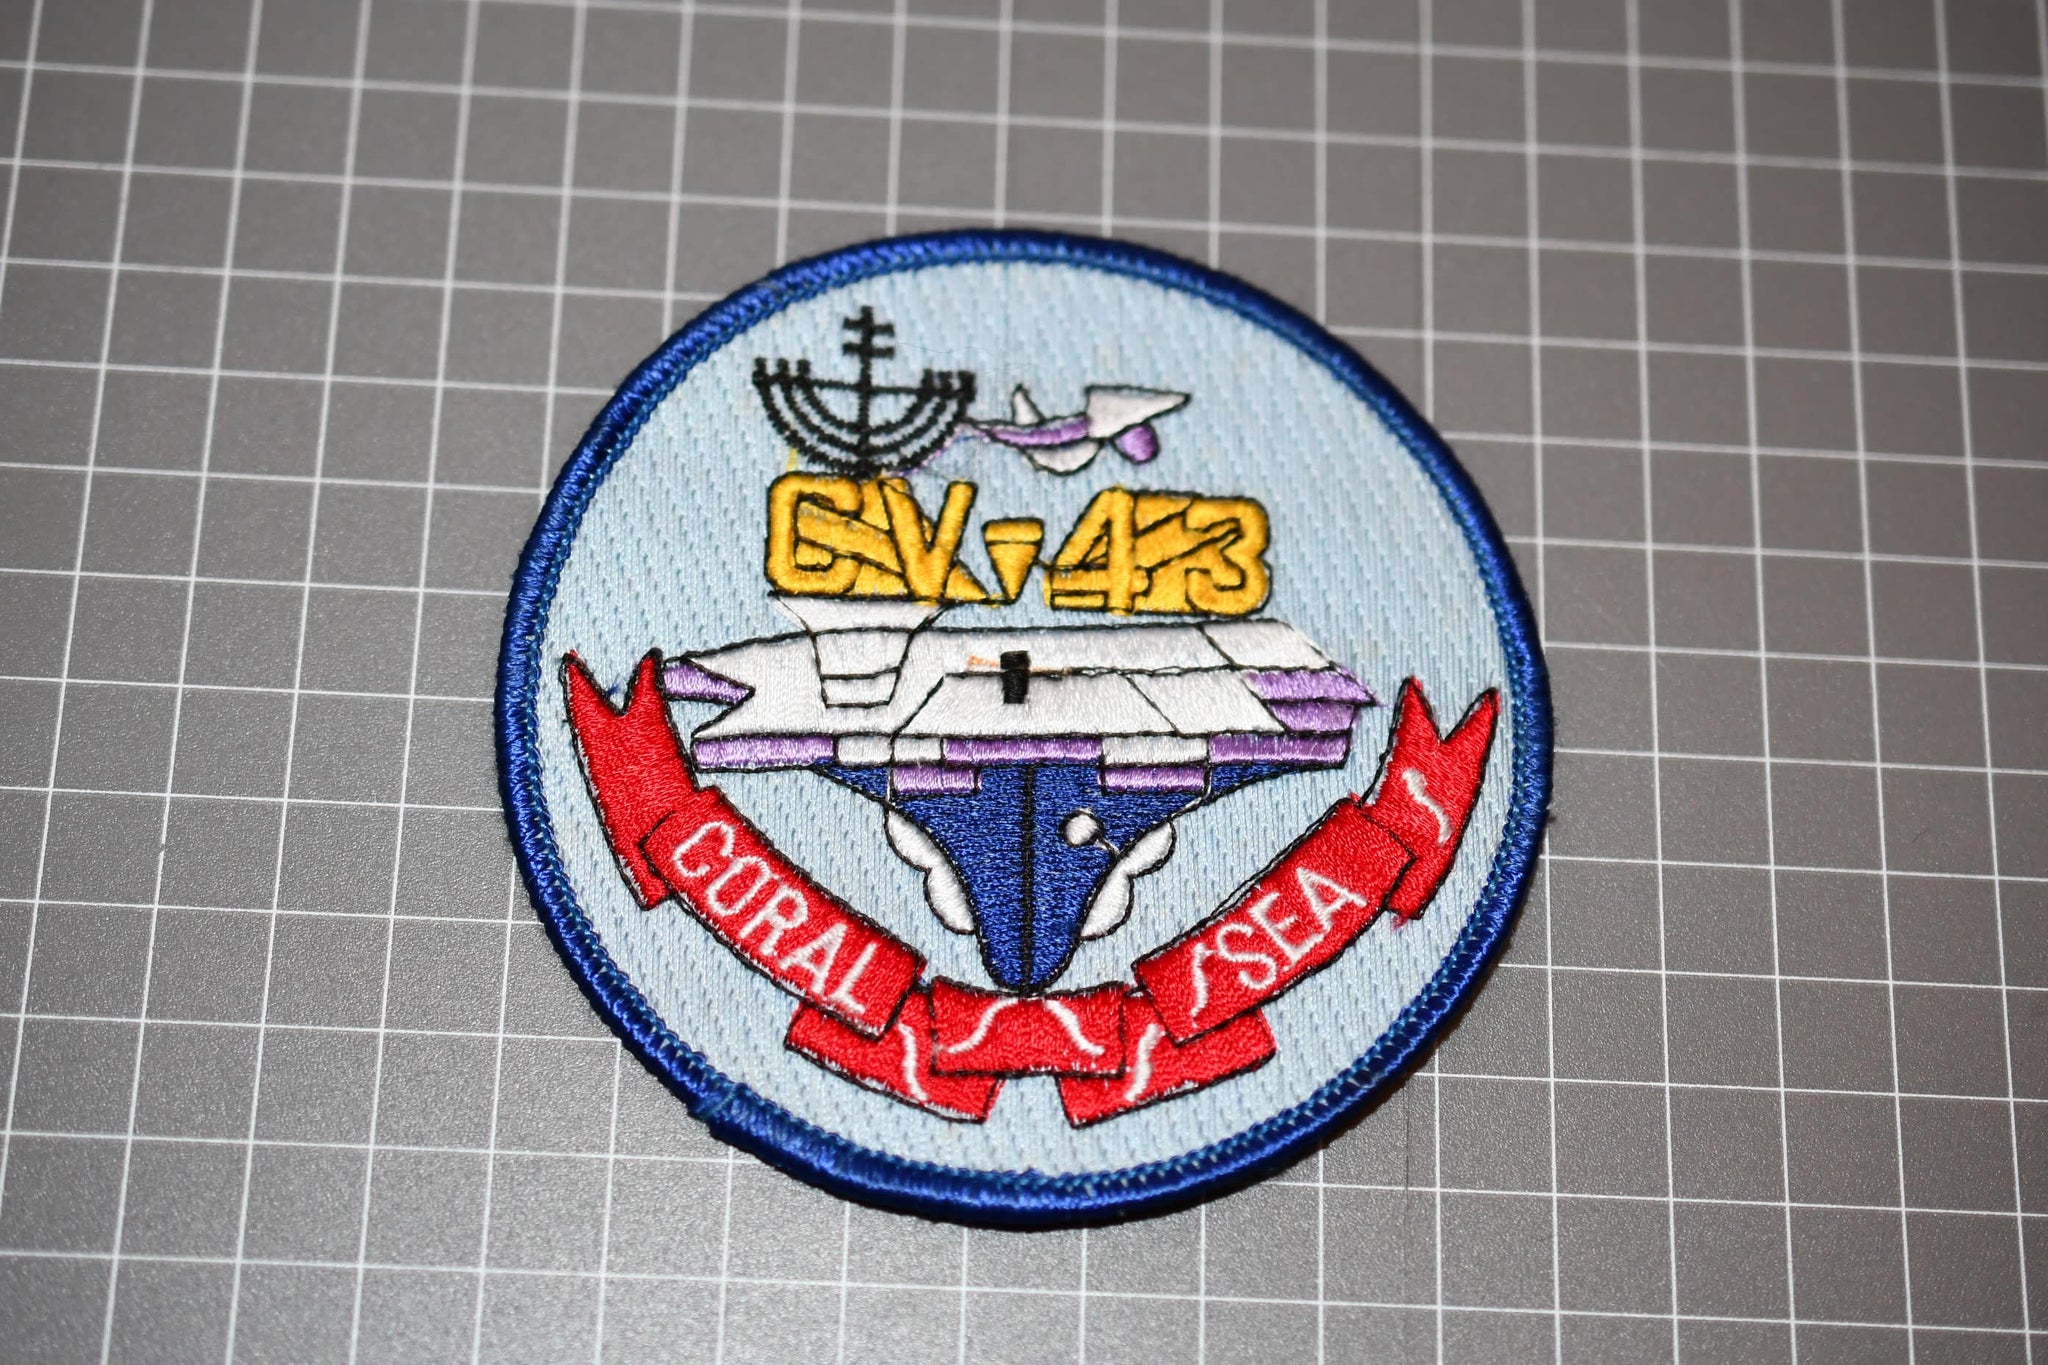 United States Navy CV-43 Coral Sea Patch (B6)